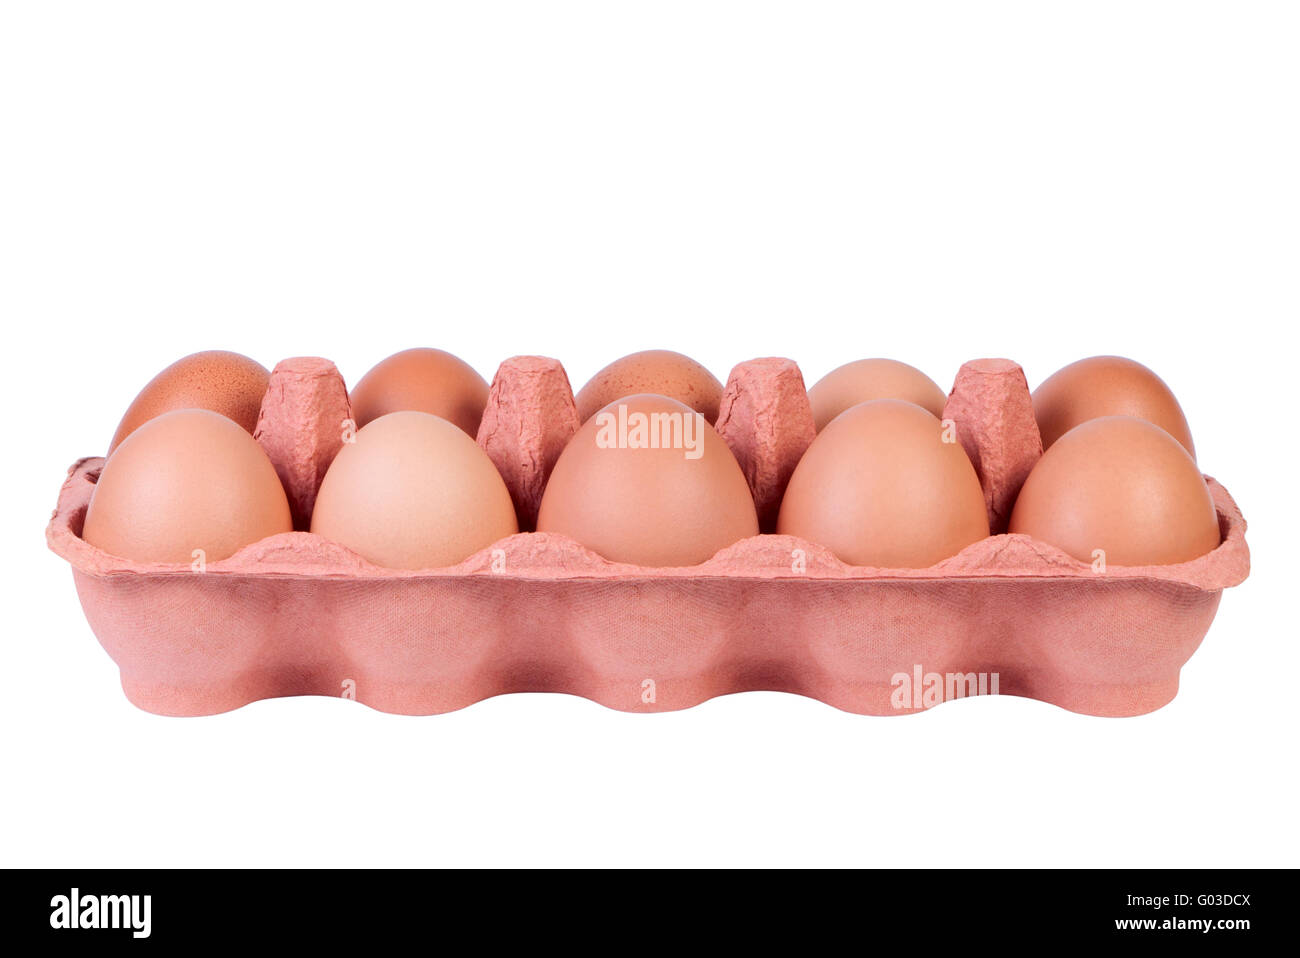 Chicken eggs in carton tray isolated on white background. Stock Photo